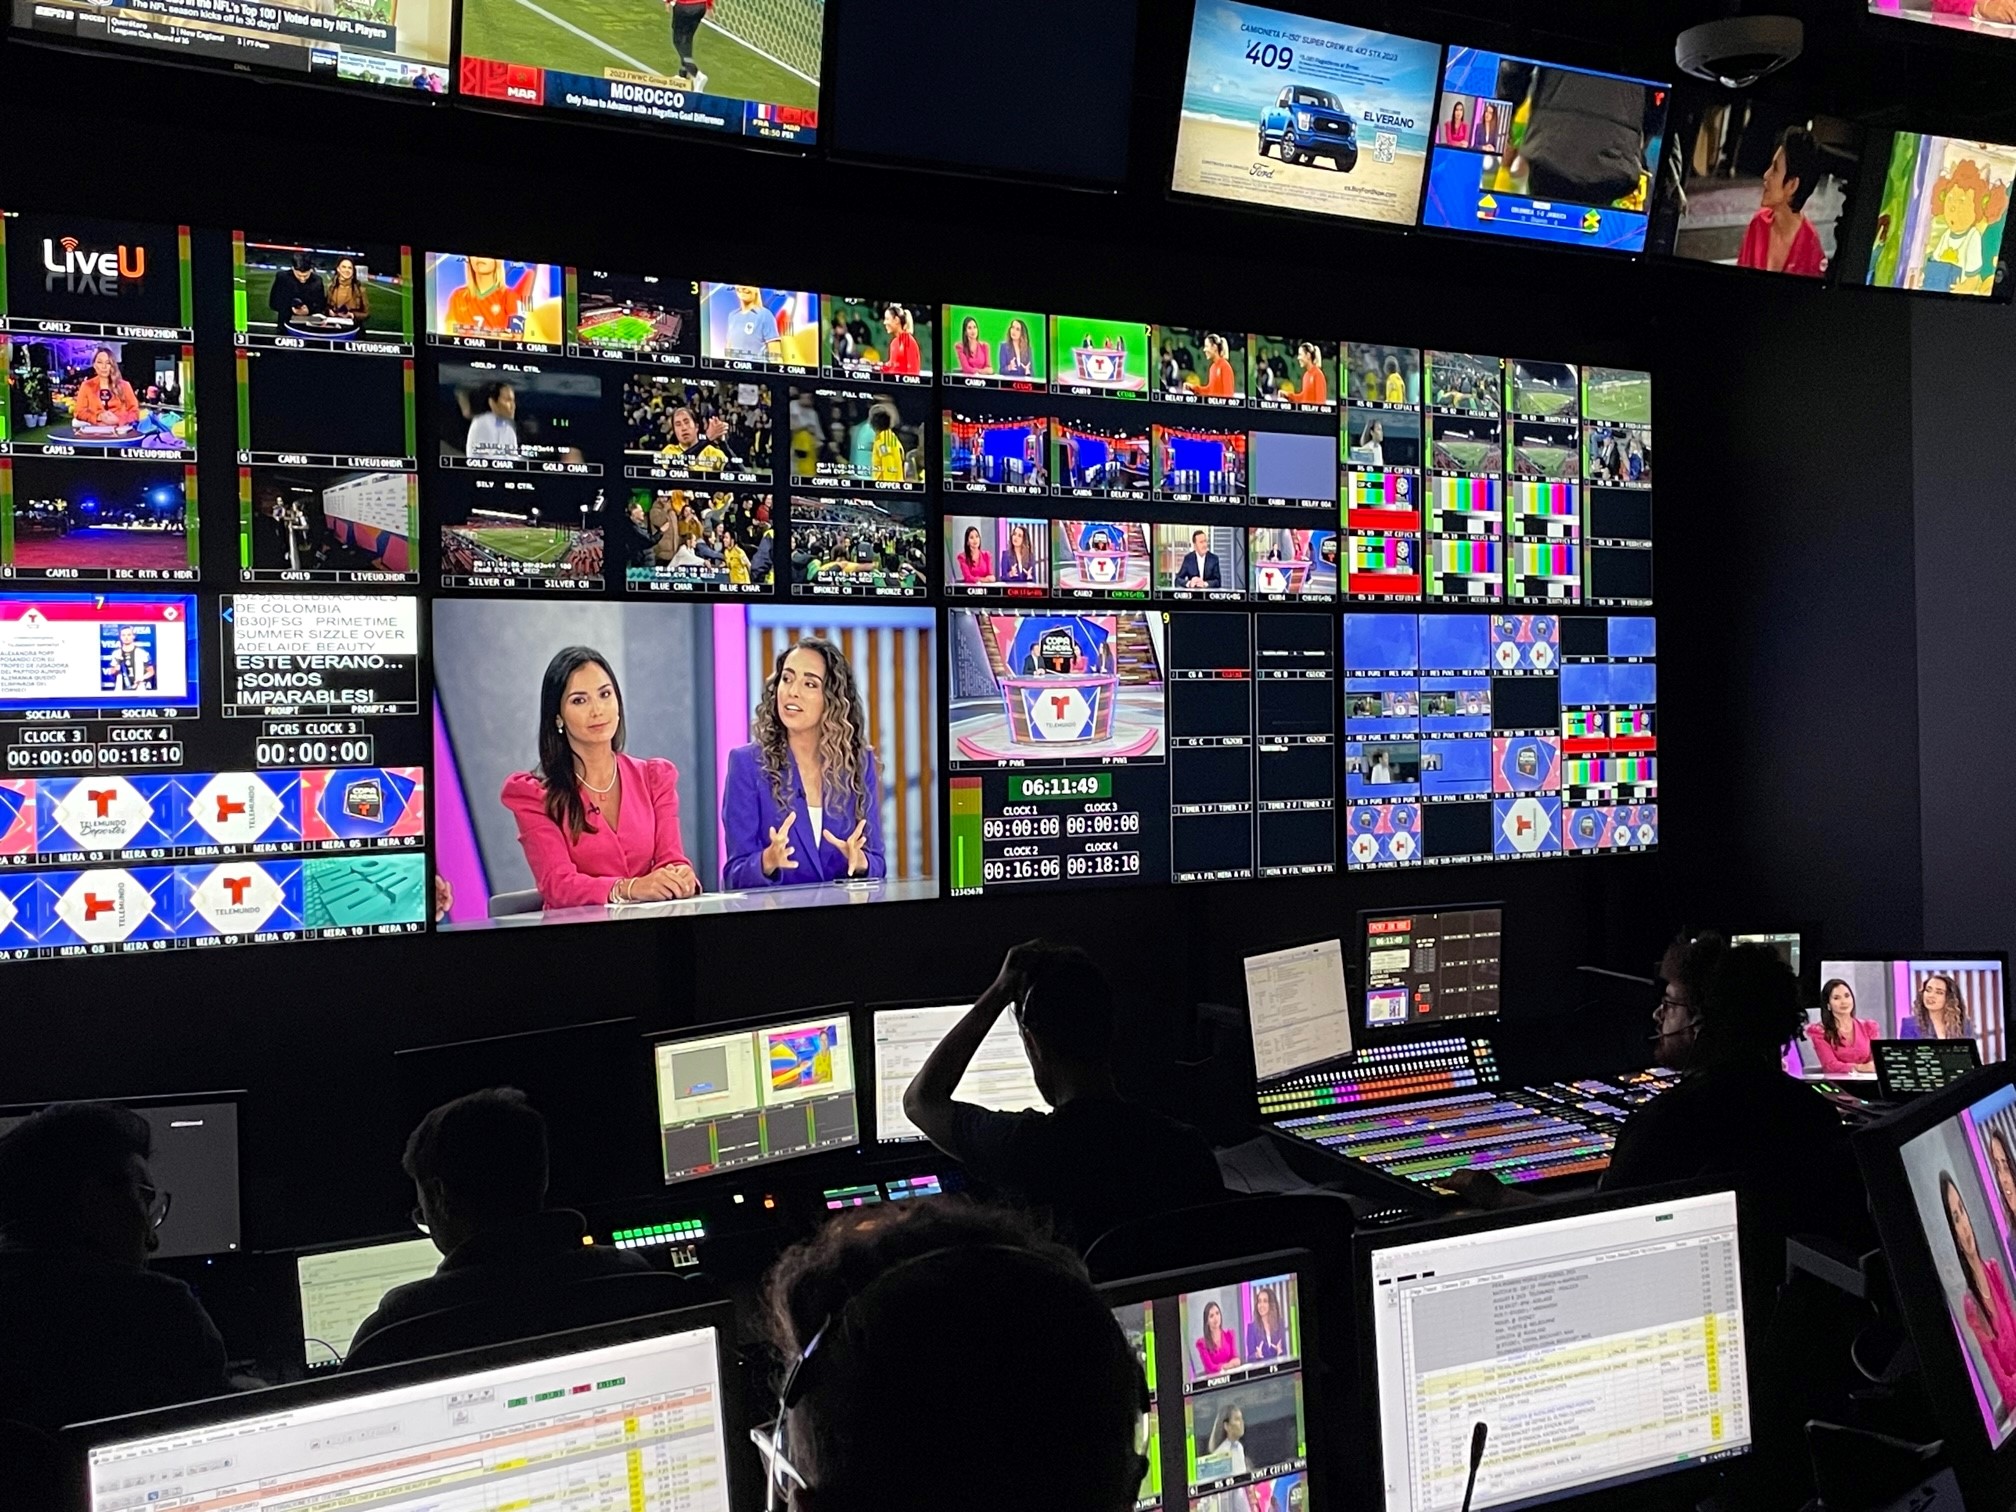 NBC Sports uses Mira for Super Bowl XLIX production - The Broadcast Bridge  - Connecting IT to Broadcast